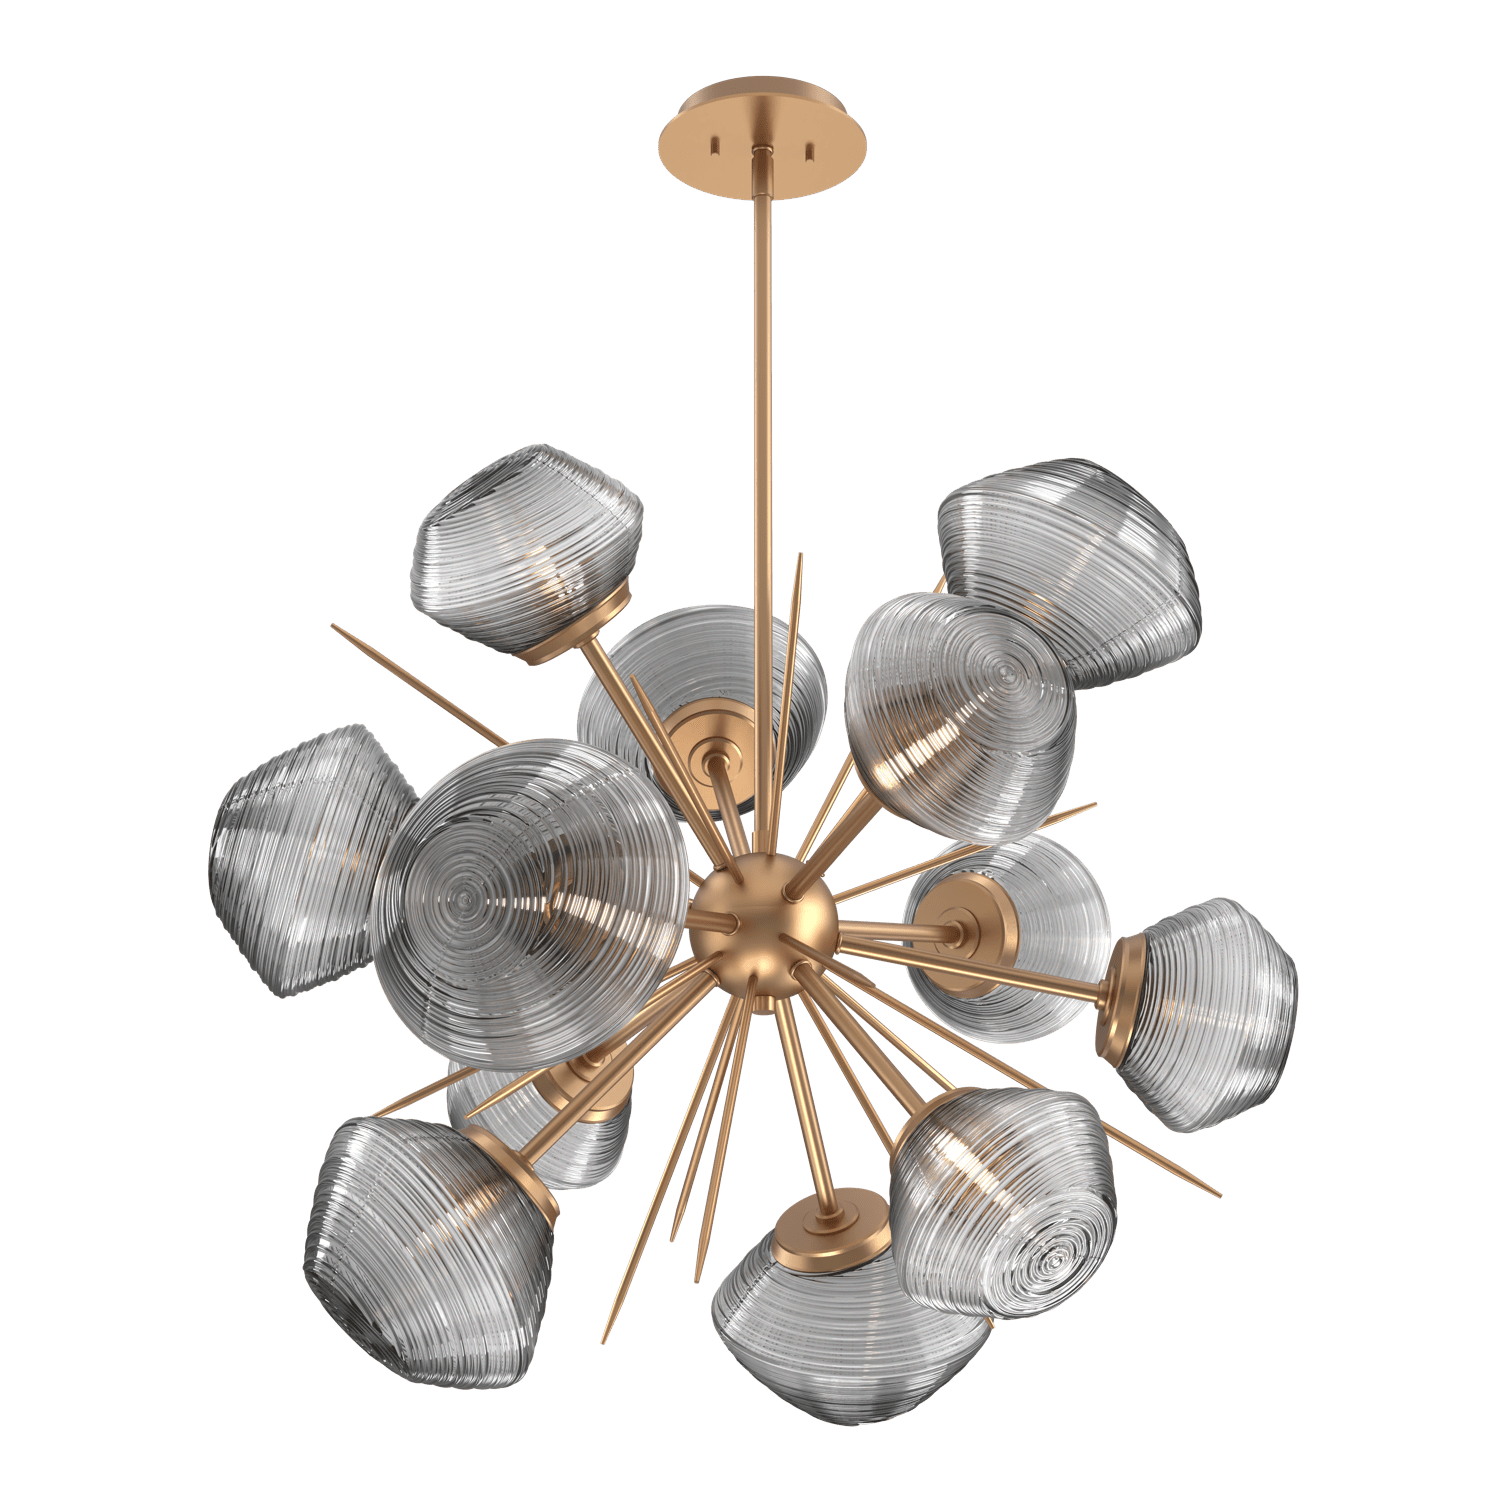 CHB0089-0G-NB-S-Hammerton-Studio-Mesa-36-inch-starburst-chandelier-with-novel-brass-finish-and-smoke-blown-glass-shades-and-LED-lamping